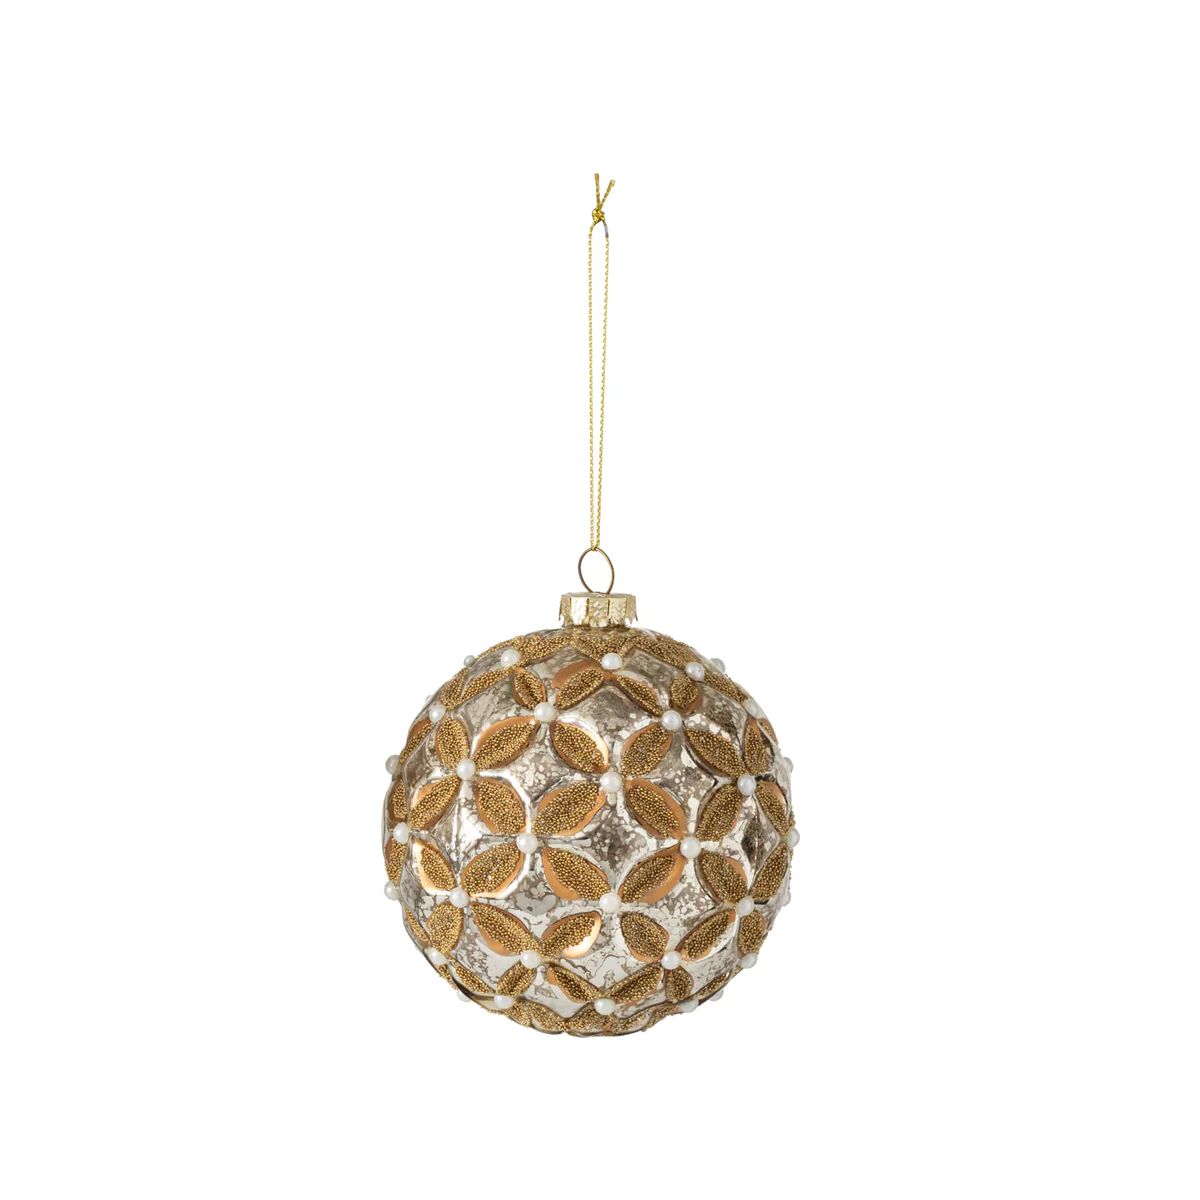 Beaded Glass Ornament | Tuesday Made